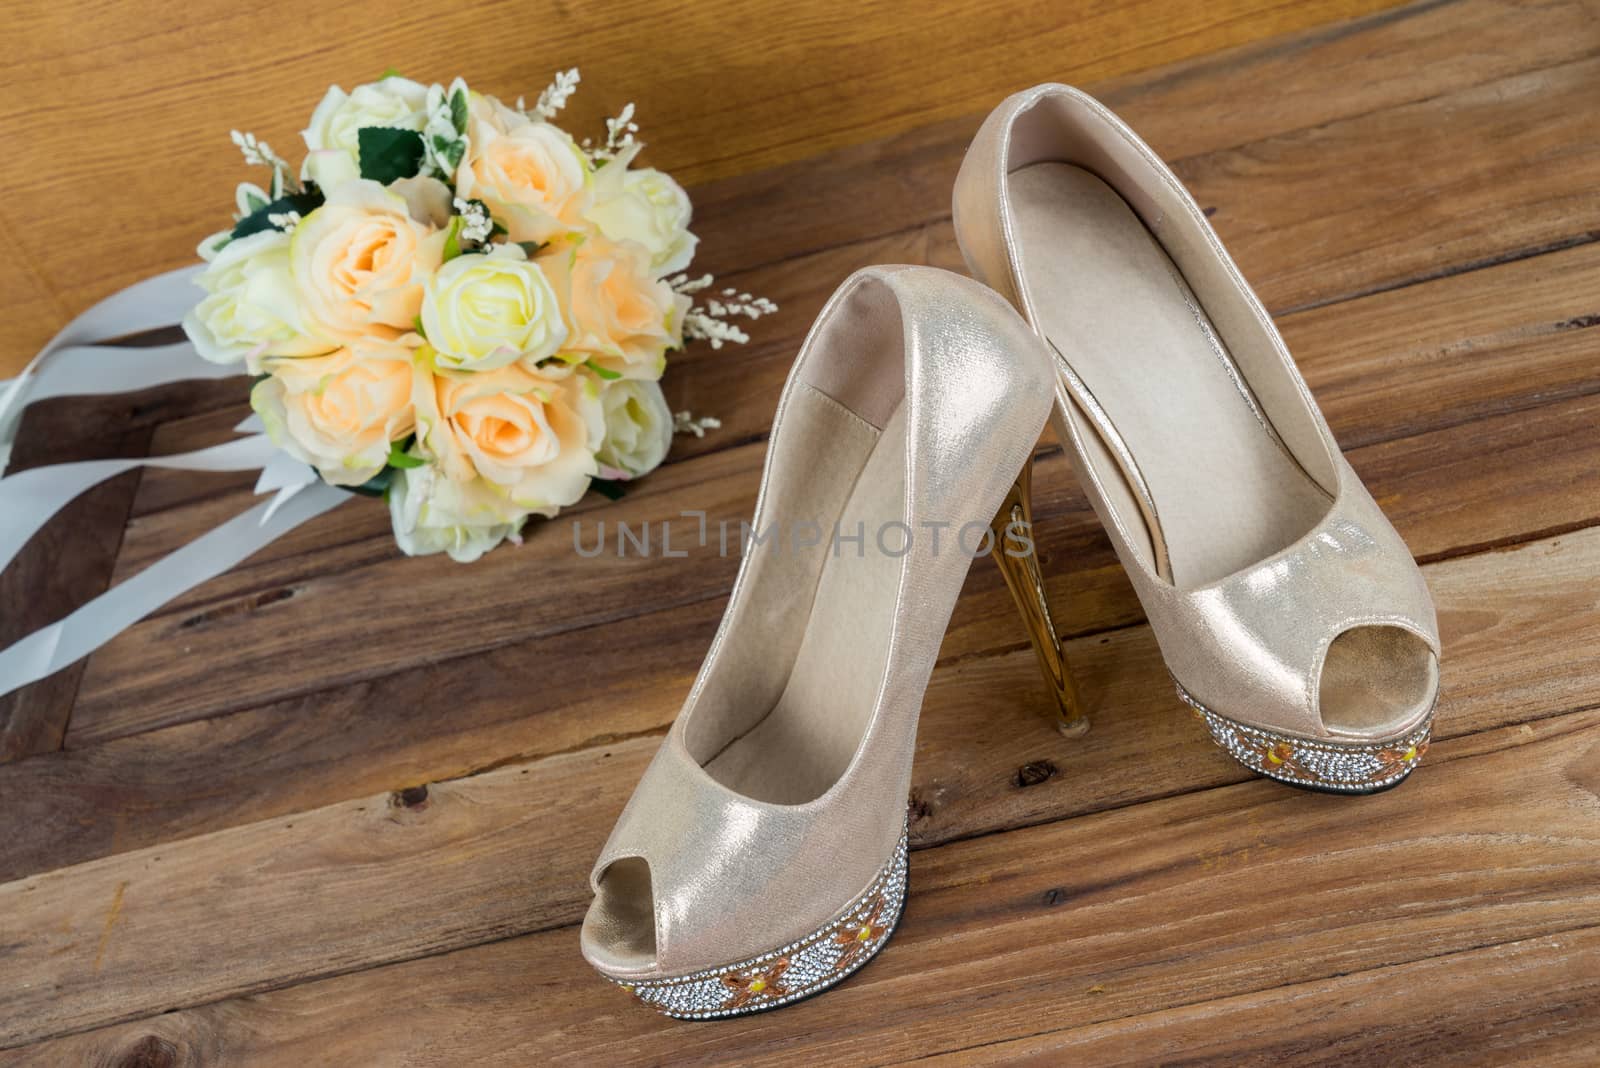 Wedding bouquet with bride's shoes on wood floor background